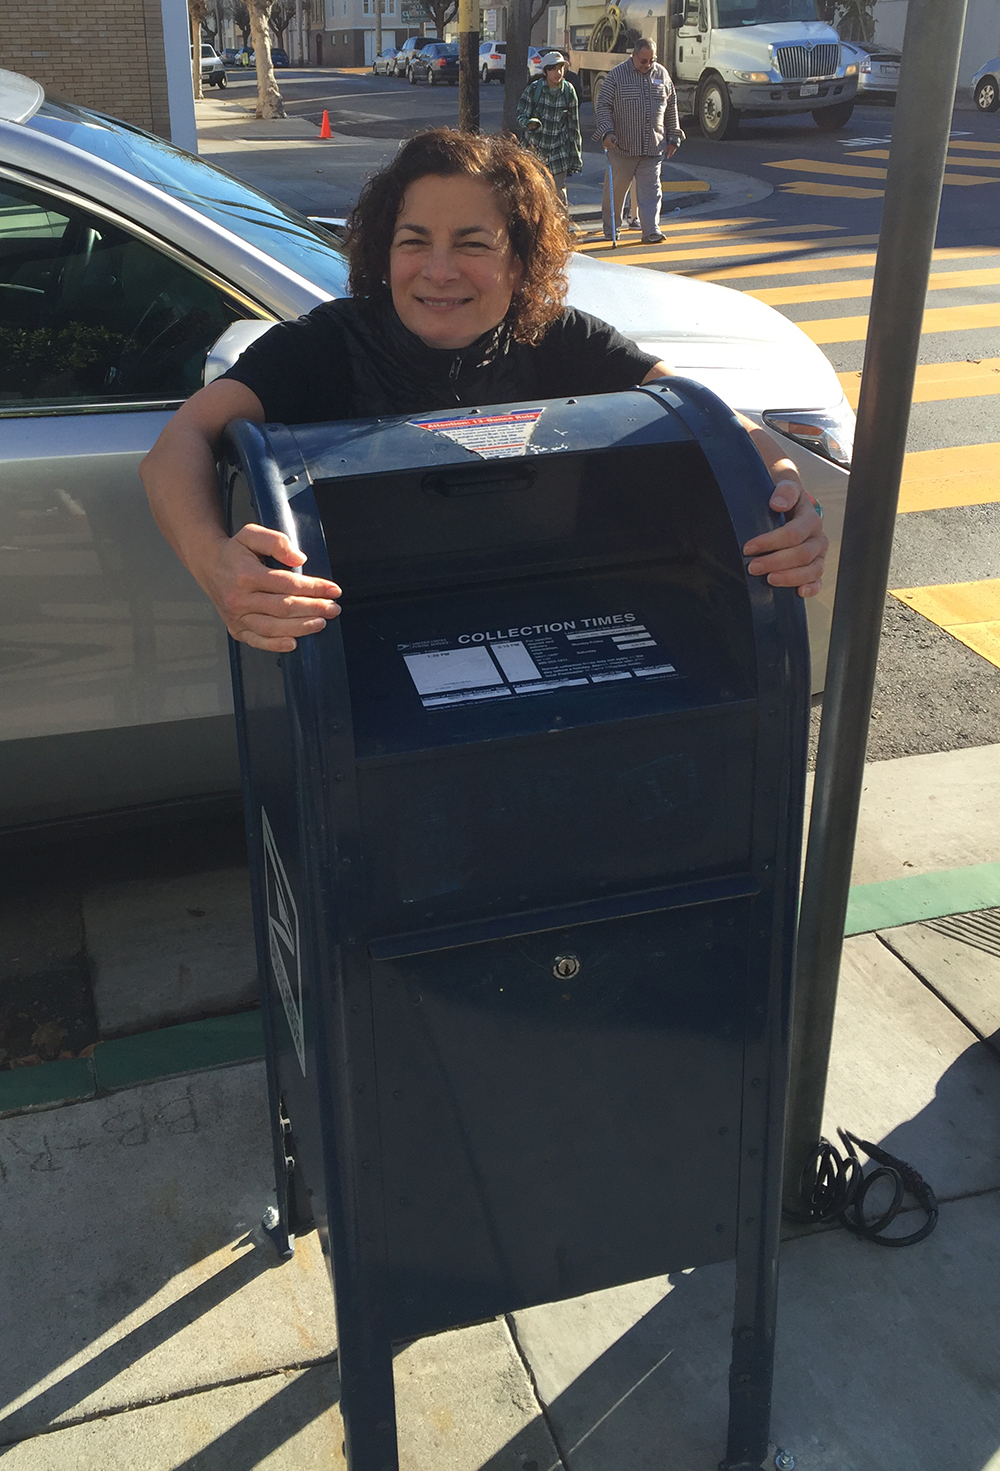 Angelina's Cafe owner Angie Rando gives the new USPS mailbox a welcoming hug